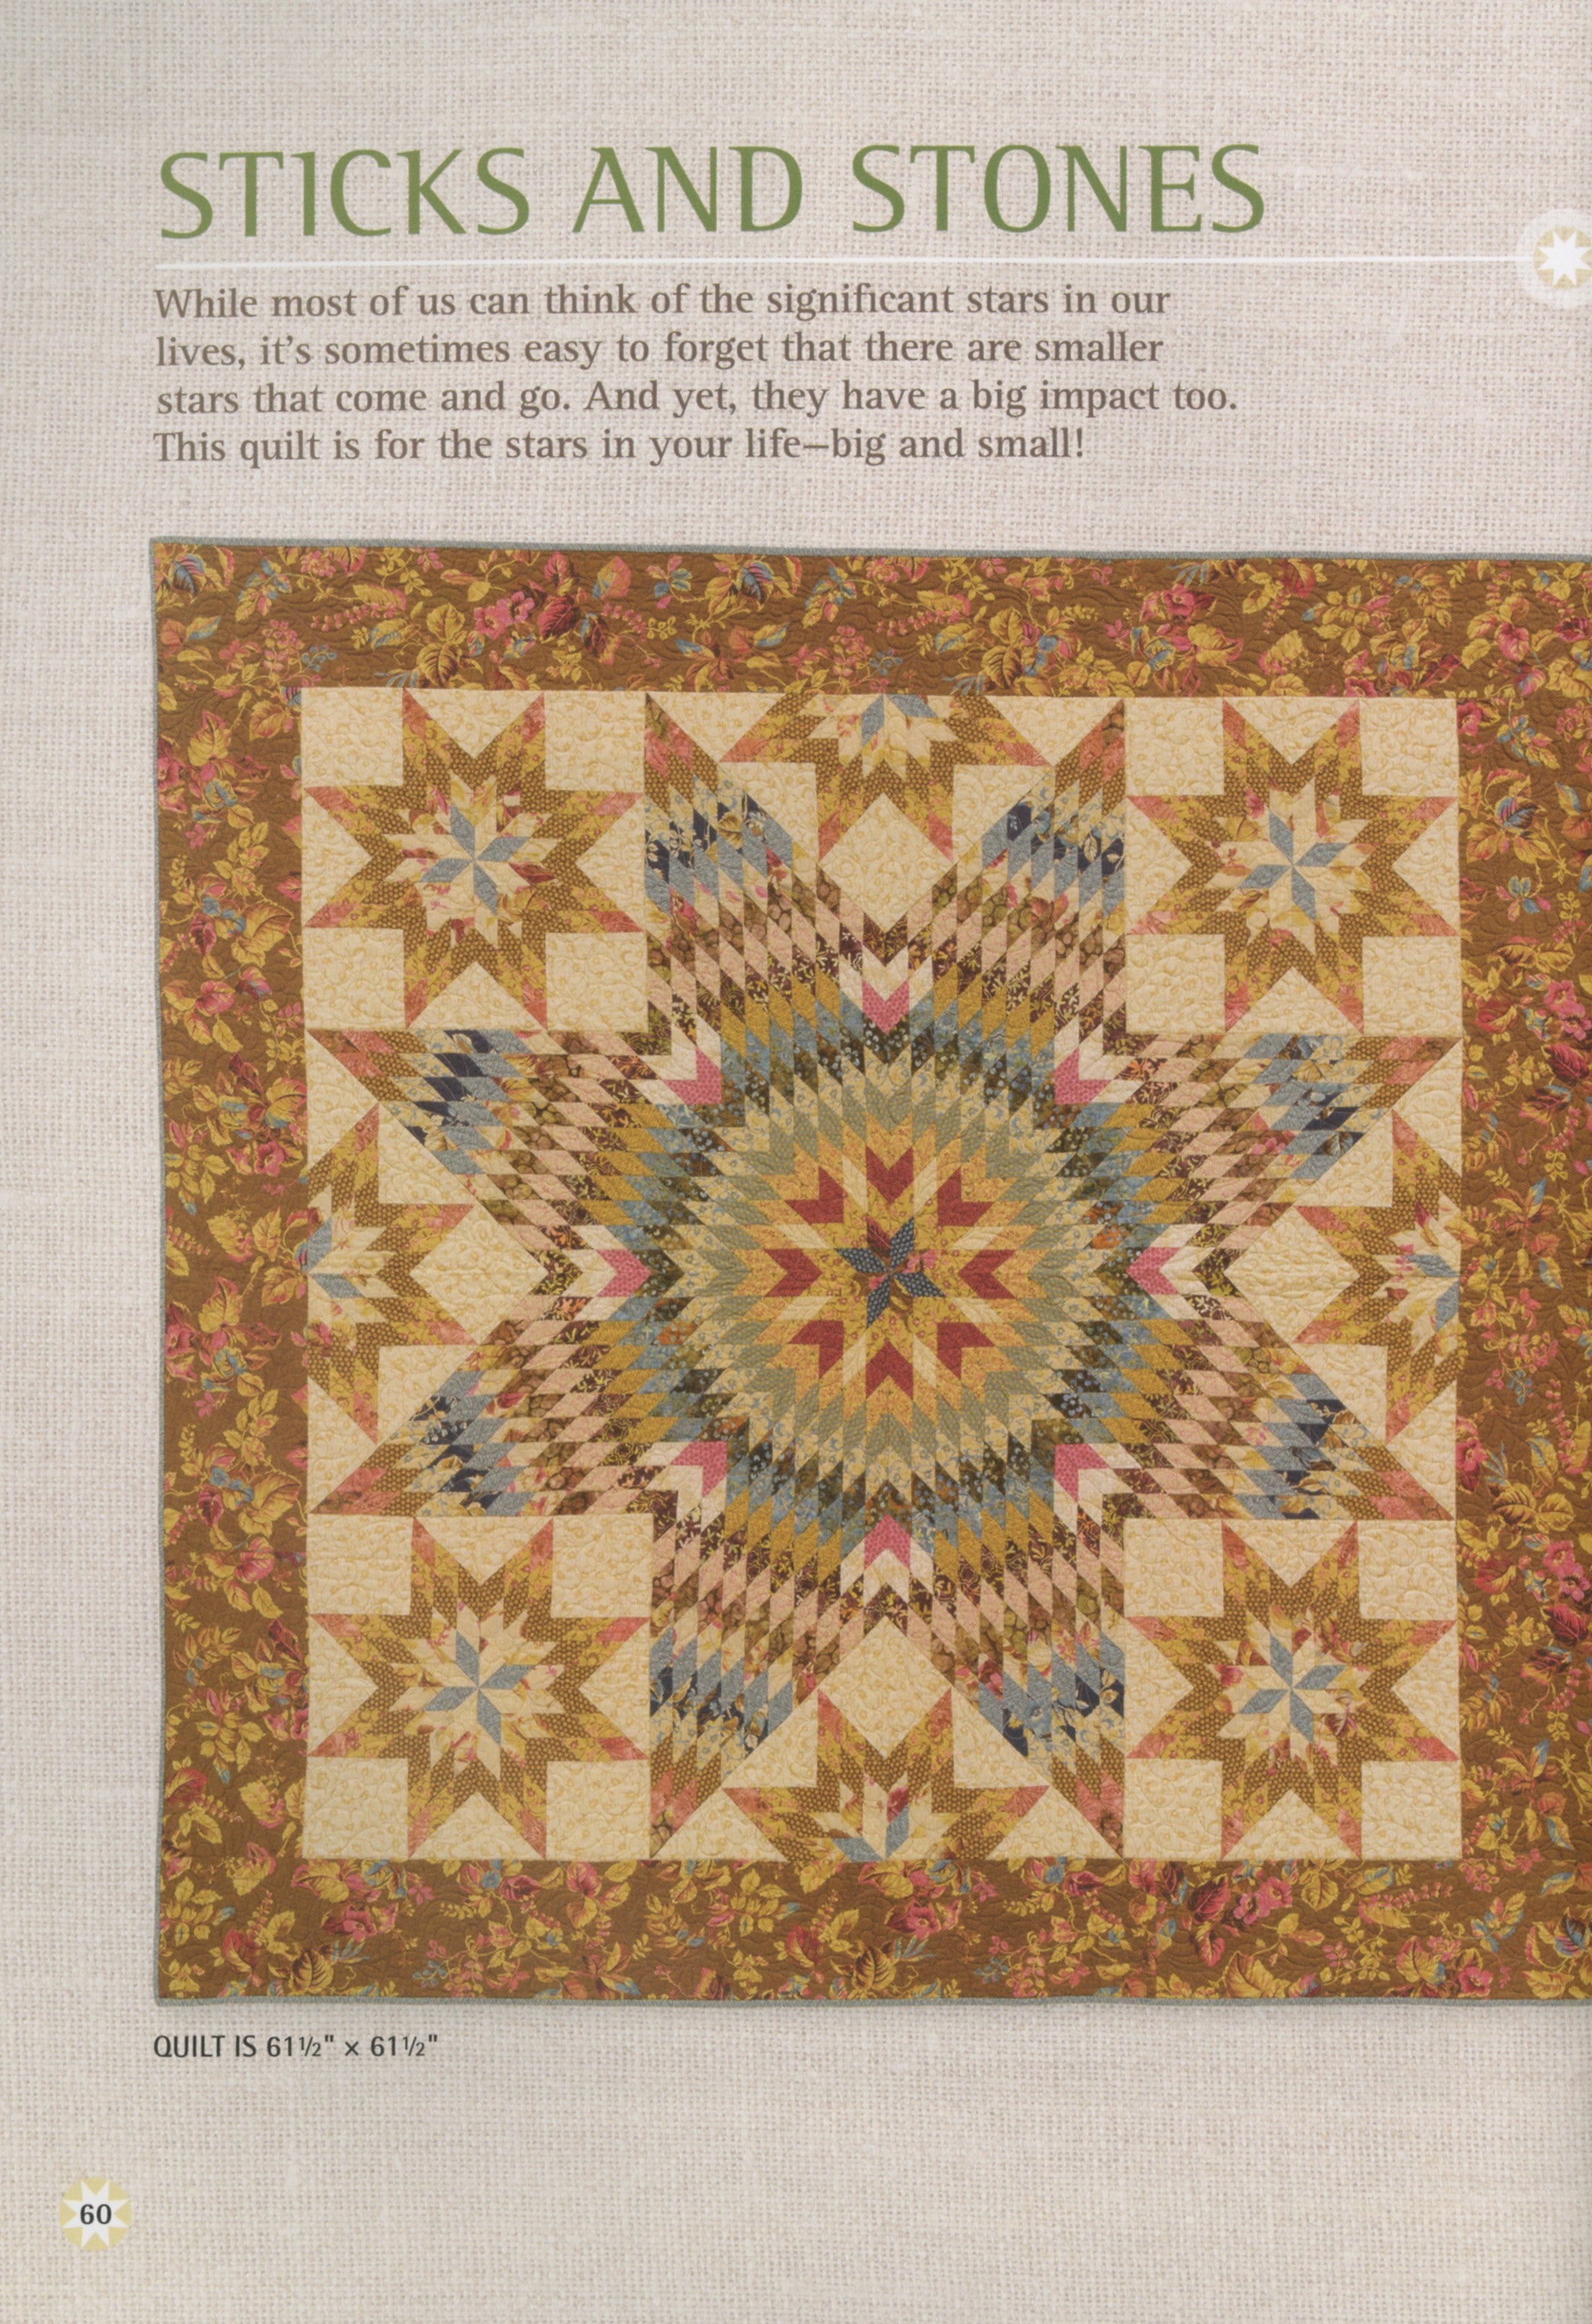 Patches Of Stars Quilt Pattern Book by Edyta Sitar of Laundry Basket Quilts